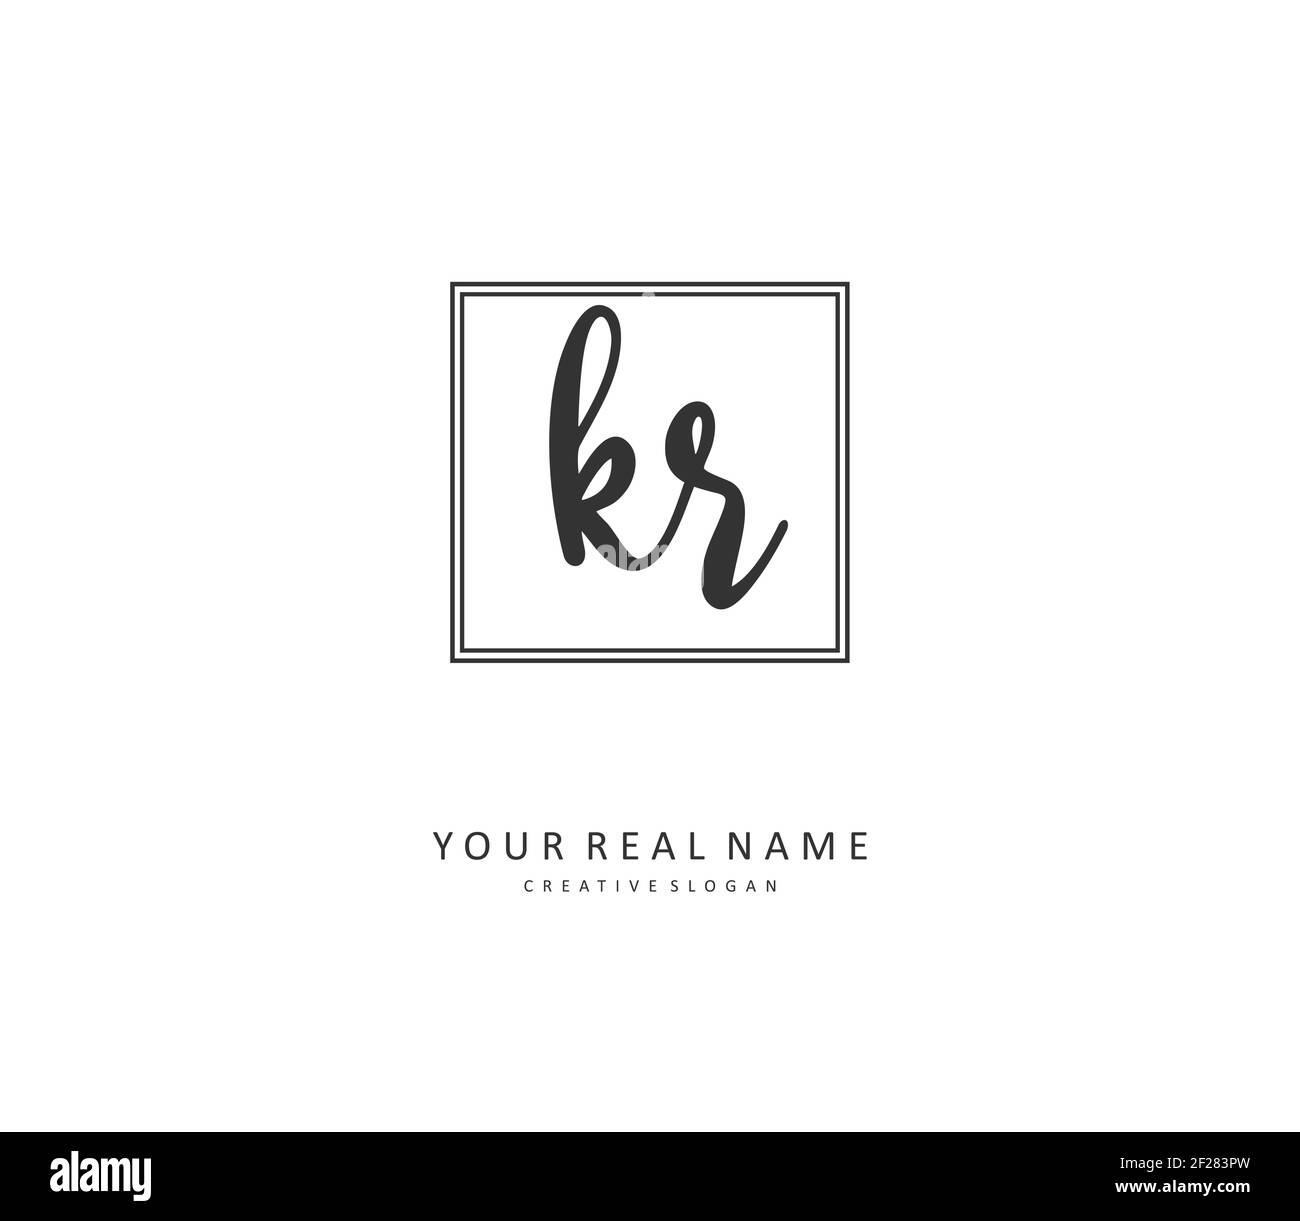 KR Initial letter handwriting and signature logo. A concept handwriting initial logo with template element. Stock Vector